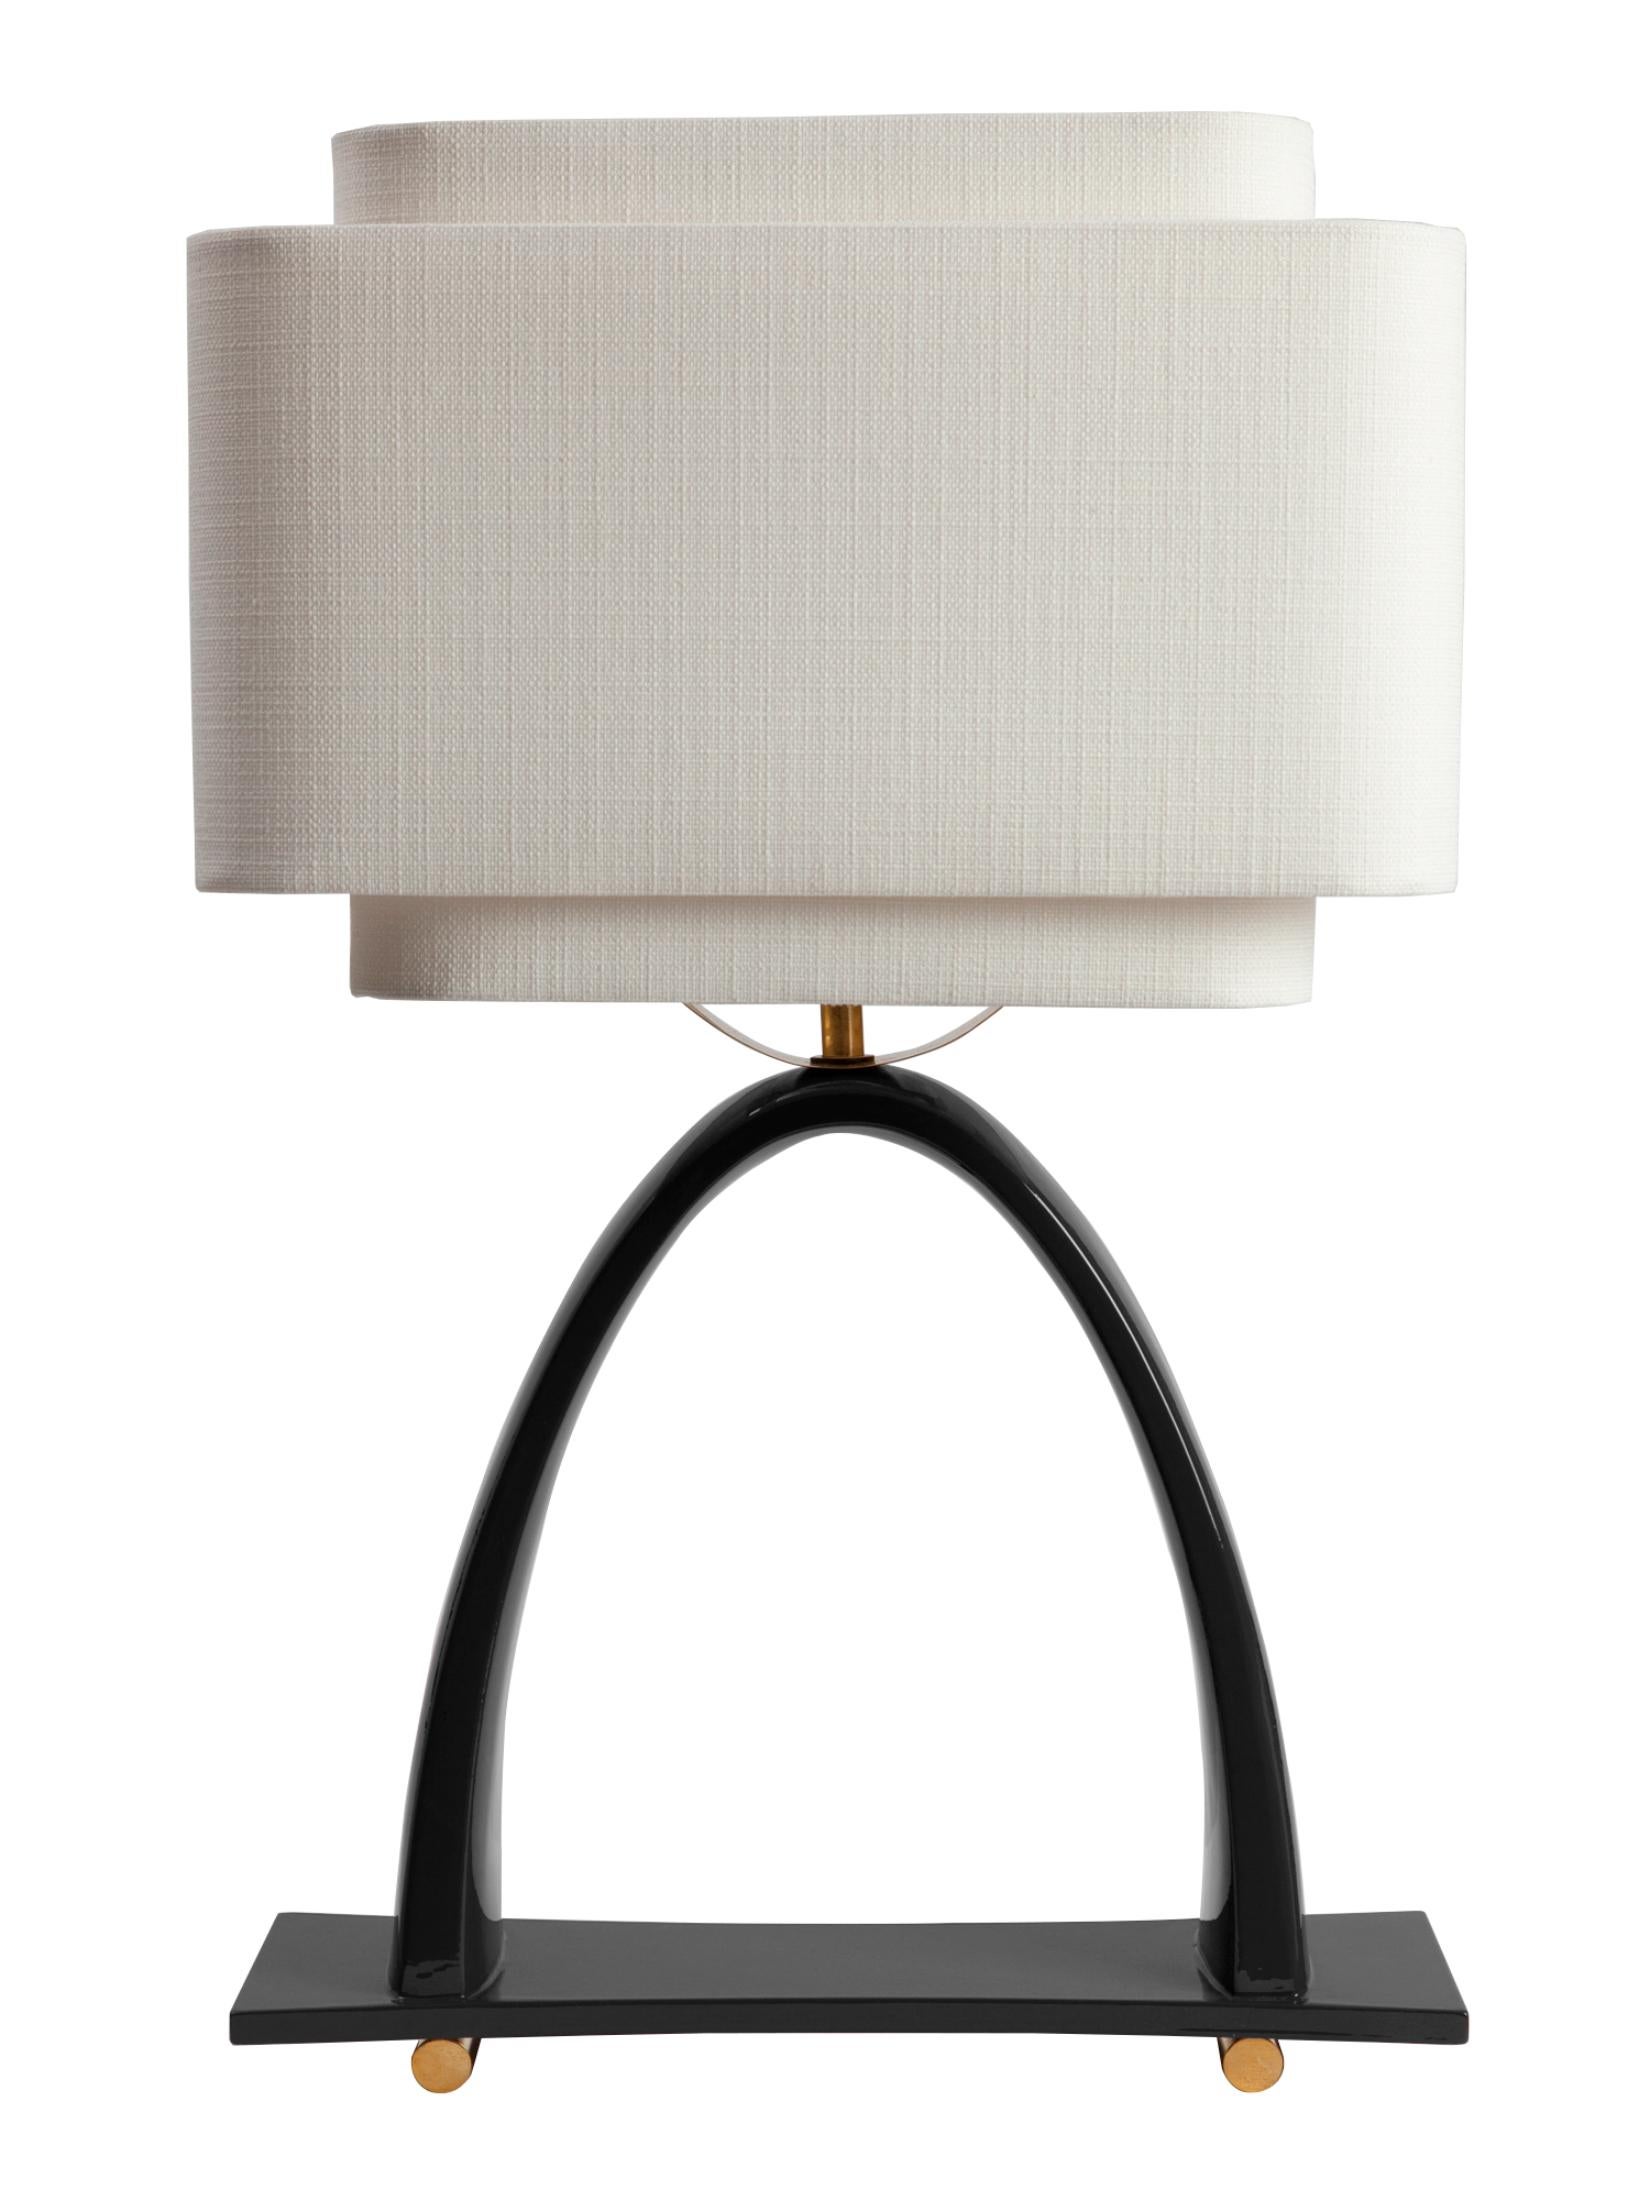 Yoshiko Table Lamp by Kira Design
Dimensions: ⌀ 37 x H 58 cm
Materials: Ceramic, Linen, Brass, Lacquered Wood
Available Colors: Blue, Red, Green, Black.

The Yoshiko desk lamp reveals delicate, slender curves, counterbalanced by a double shade that